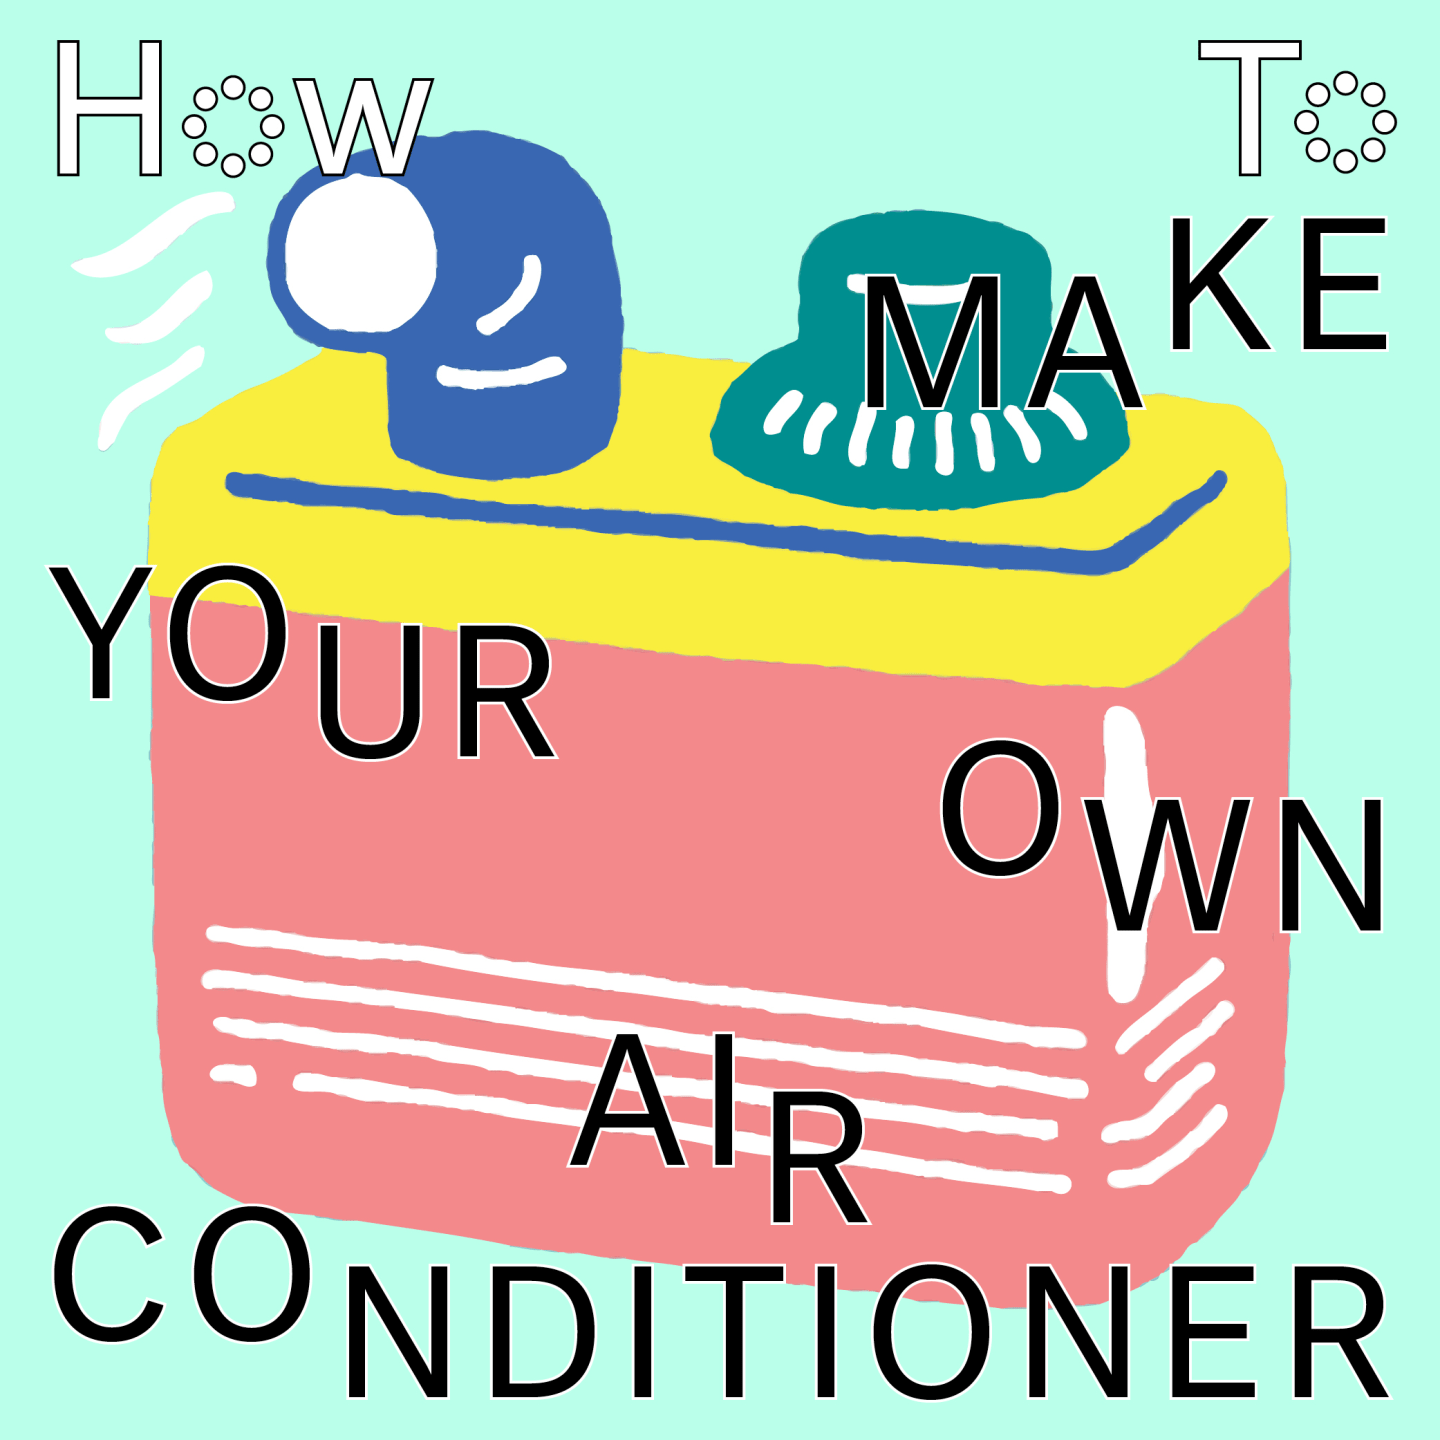 How To Make Your Own Air Conditioner